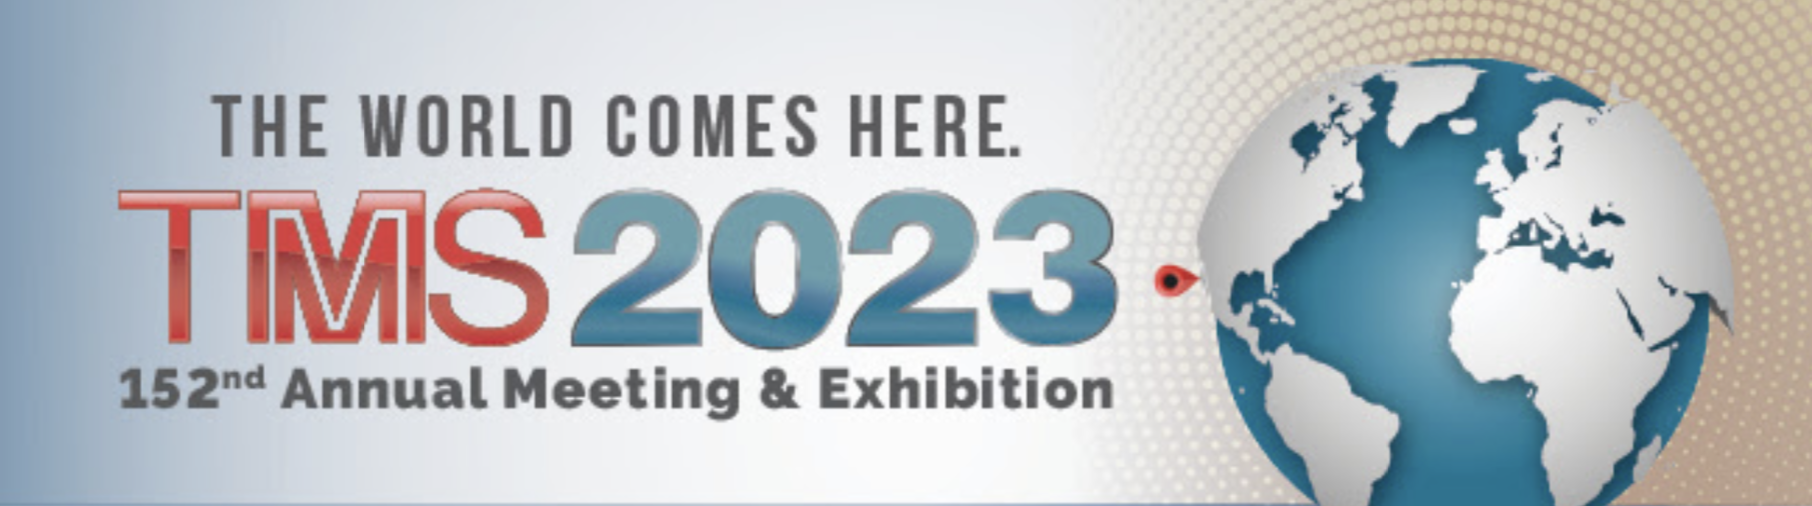 Who will you connect with at TMS2023?